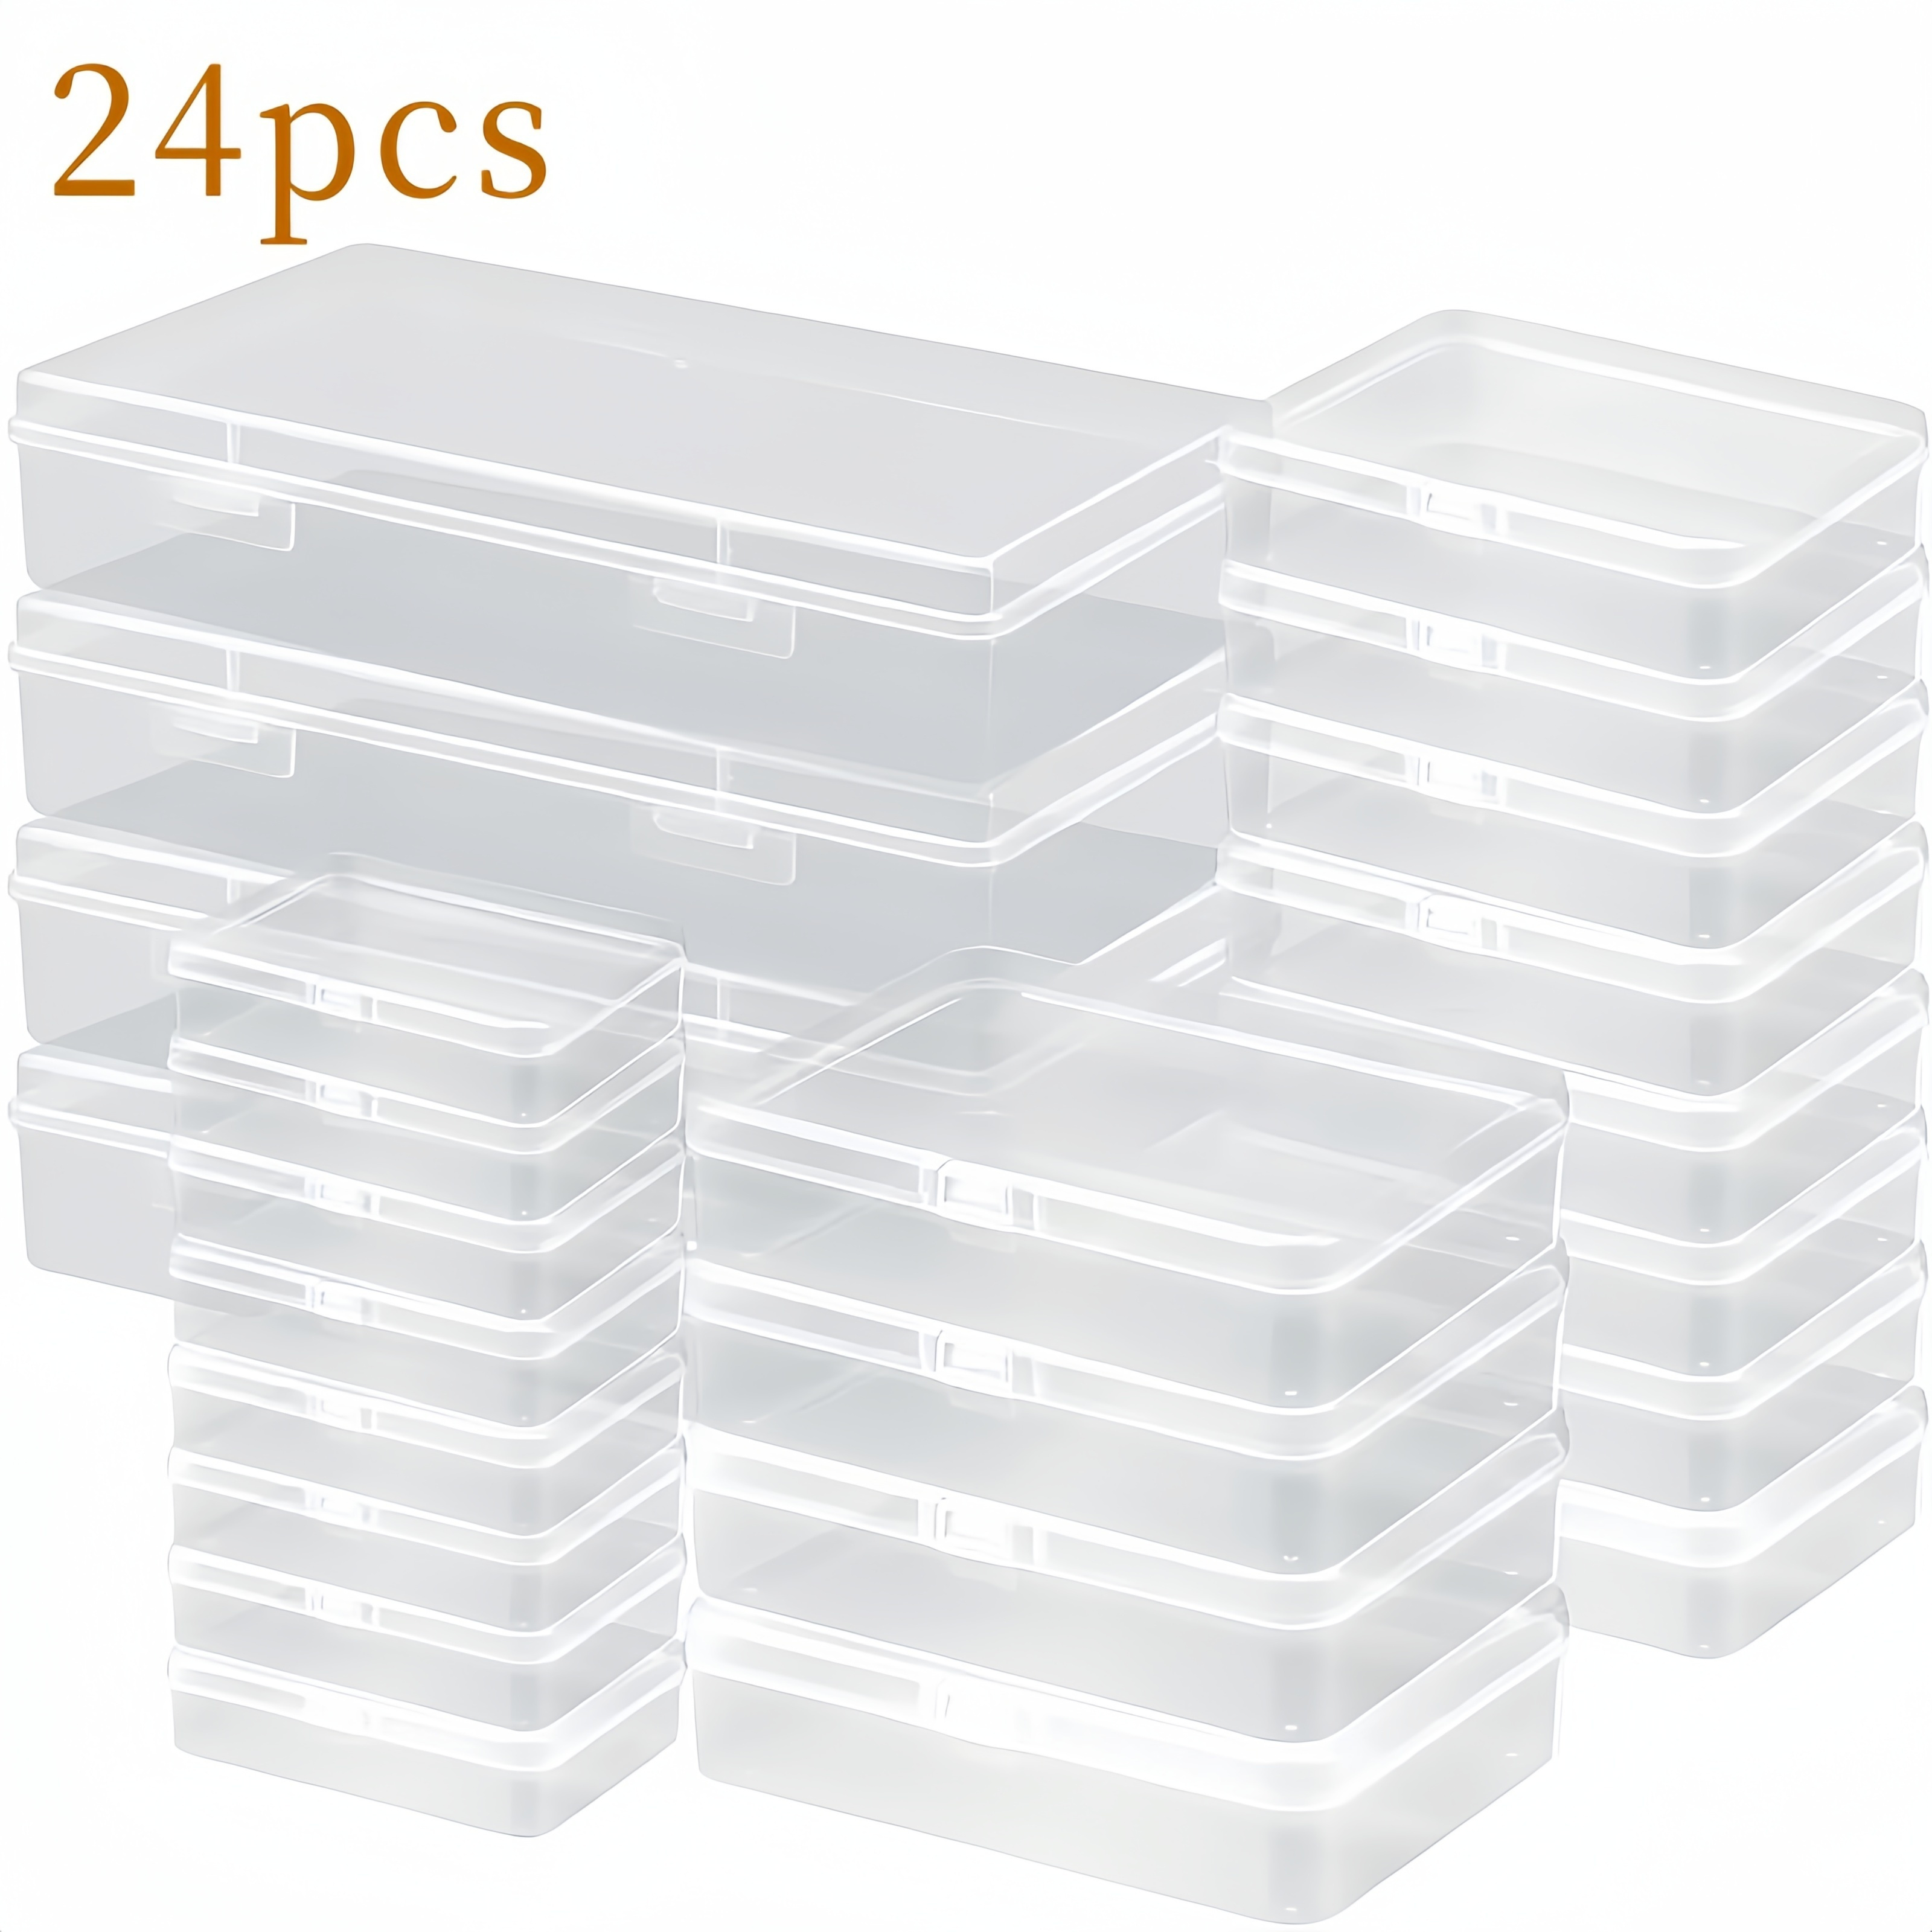 

24pcs Transparent Plastic Storage Box Set, Rectangle Storage Box Container, Jewelry Parts Accessories Organizer, Office Supplies Stationery Sorting Packaging Box, Storage Supplies